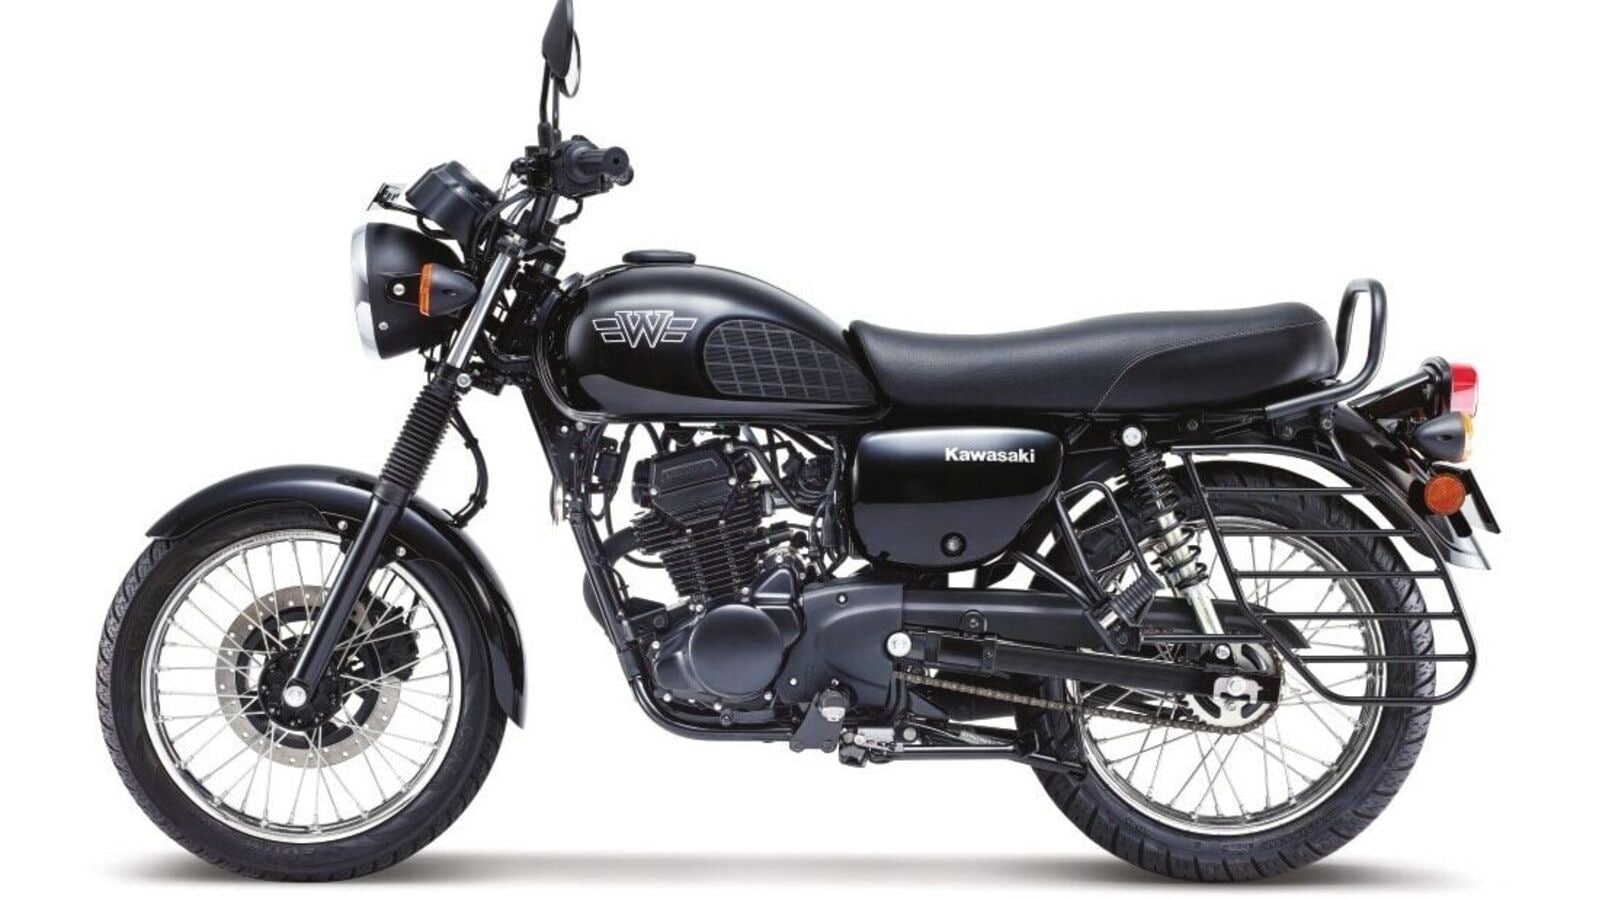 Kawasaki W175 deliveries begin: 5 things to know about the RE Hunter rival